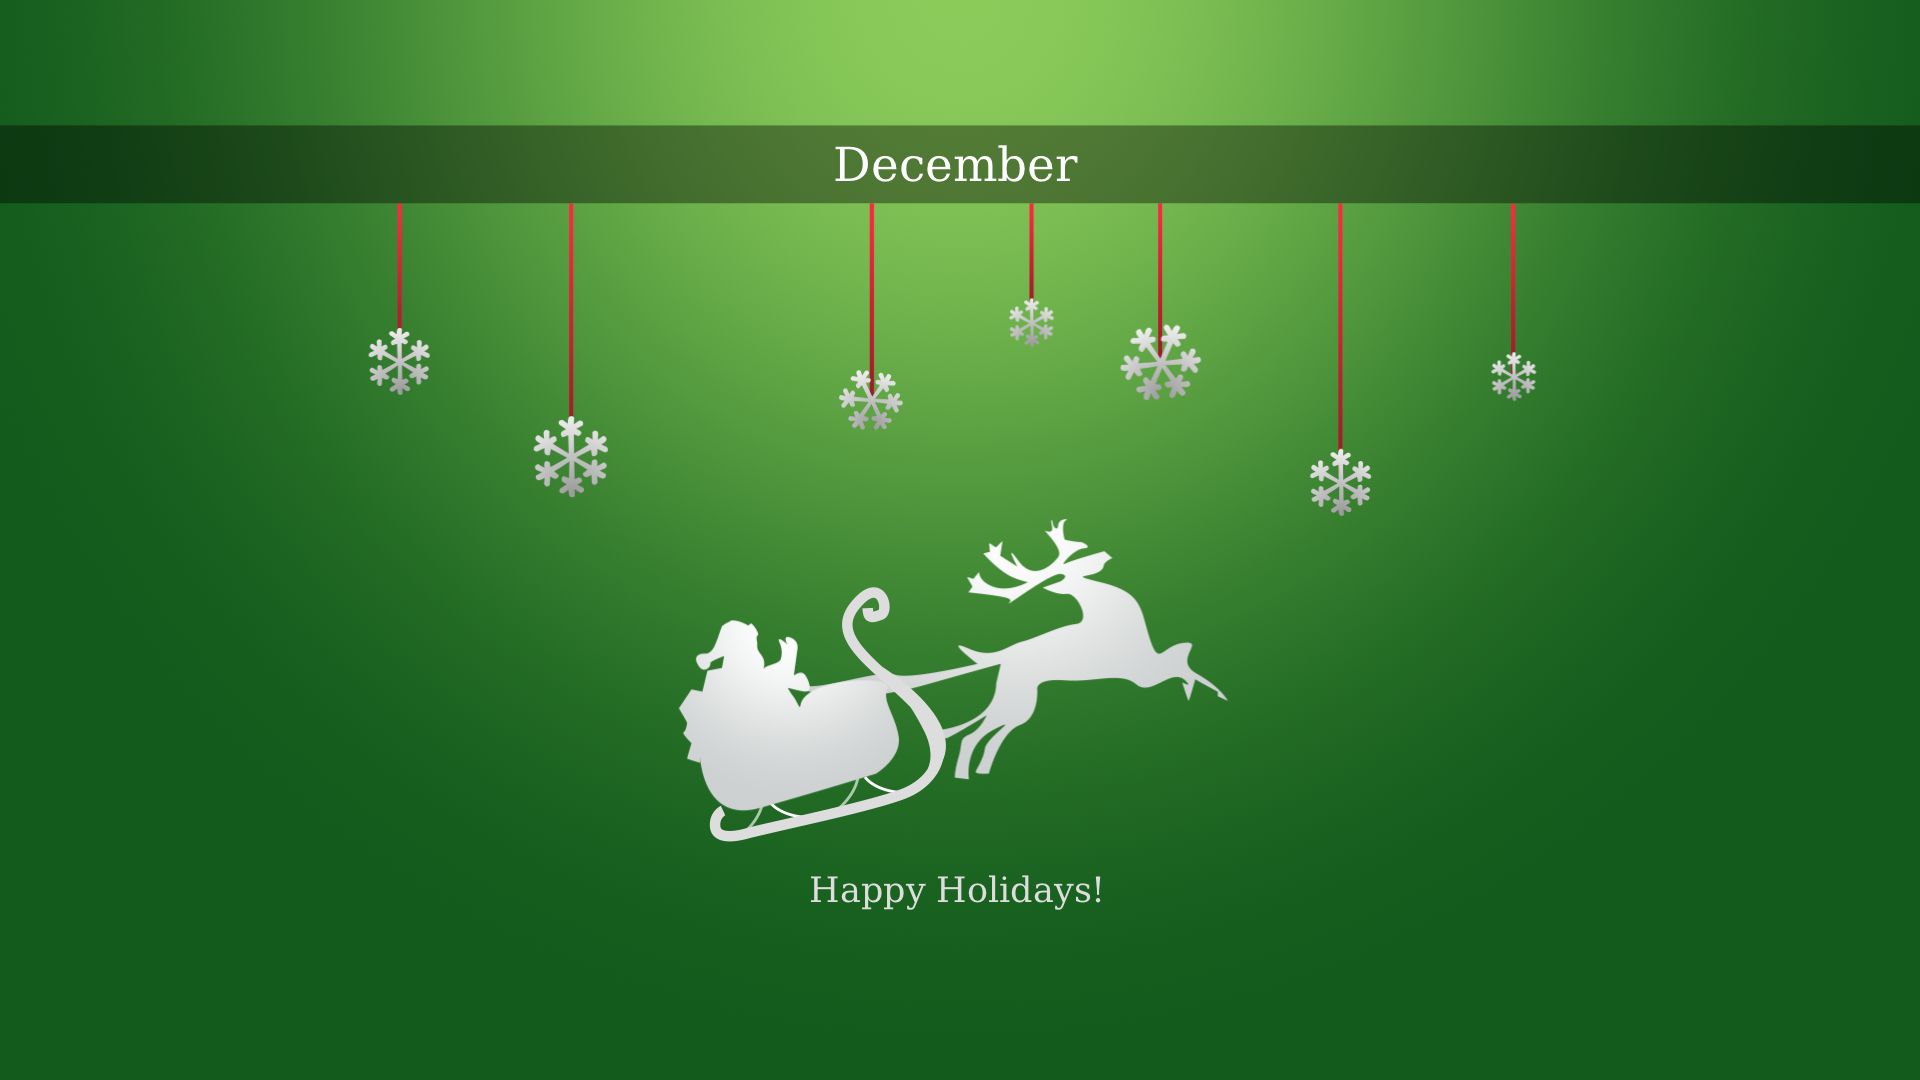 HD Wallpaper Happy Holidays Clean